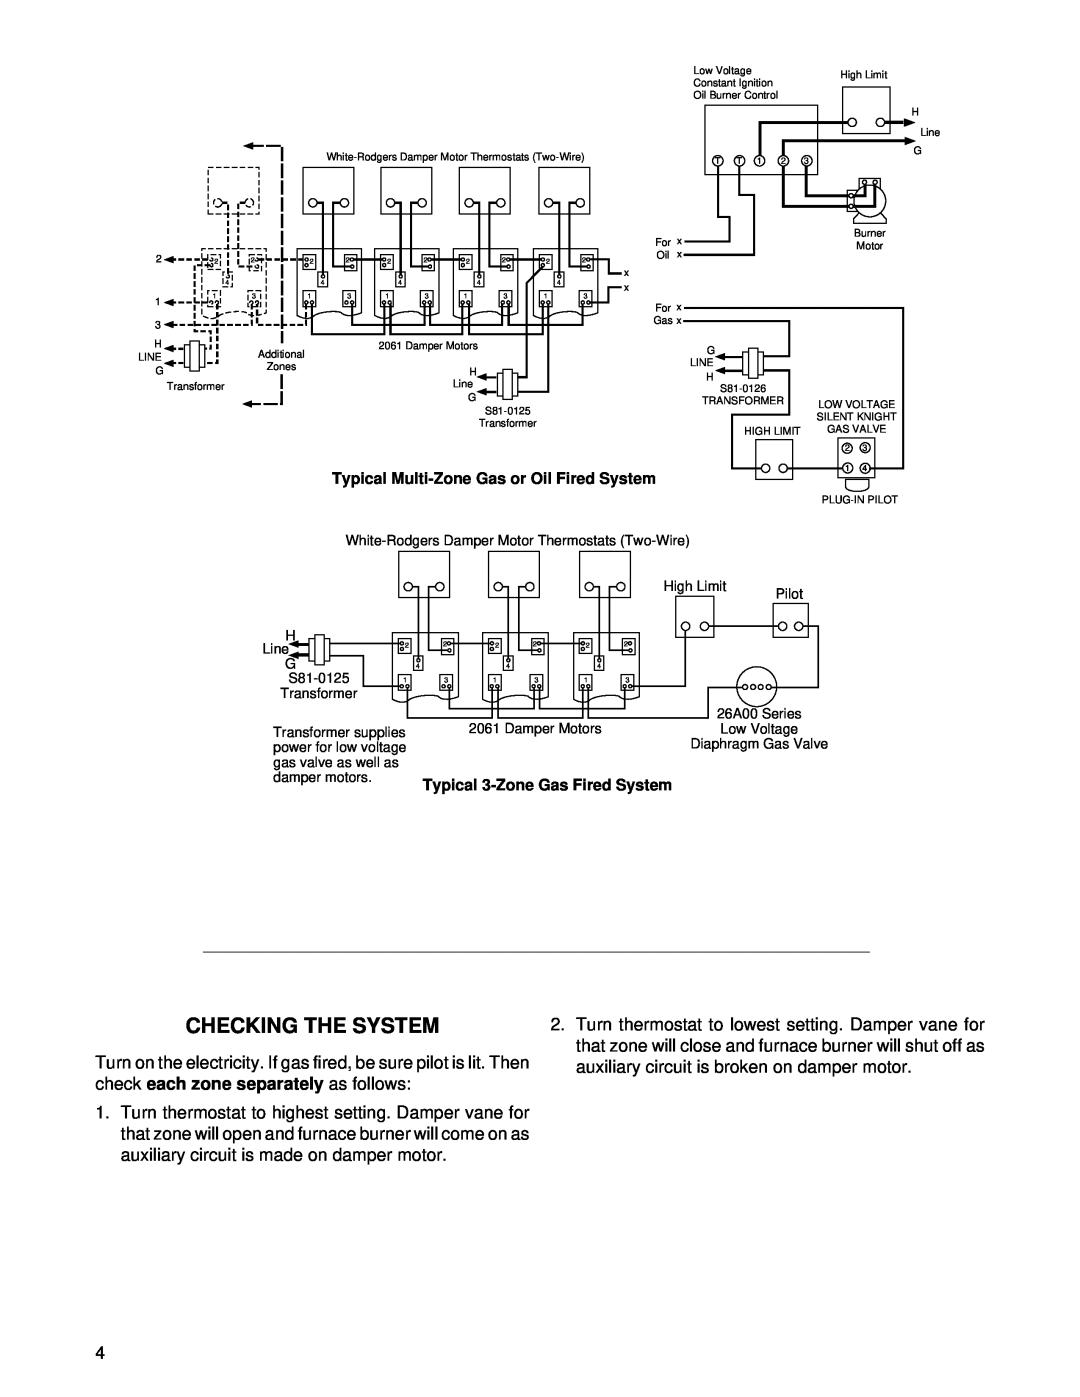 White Rodgers 2061 installation instructions Checking The System 